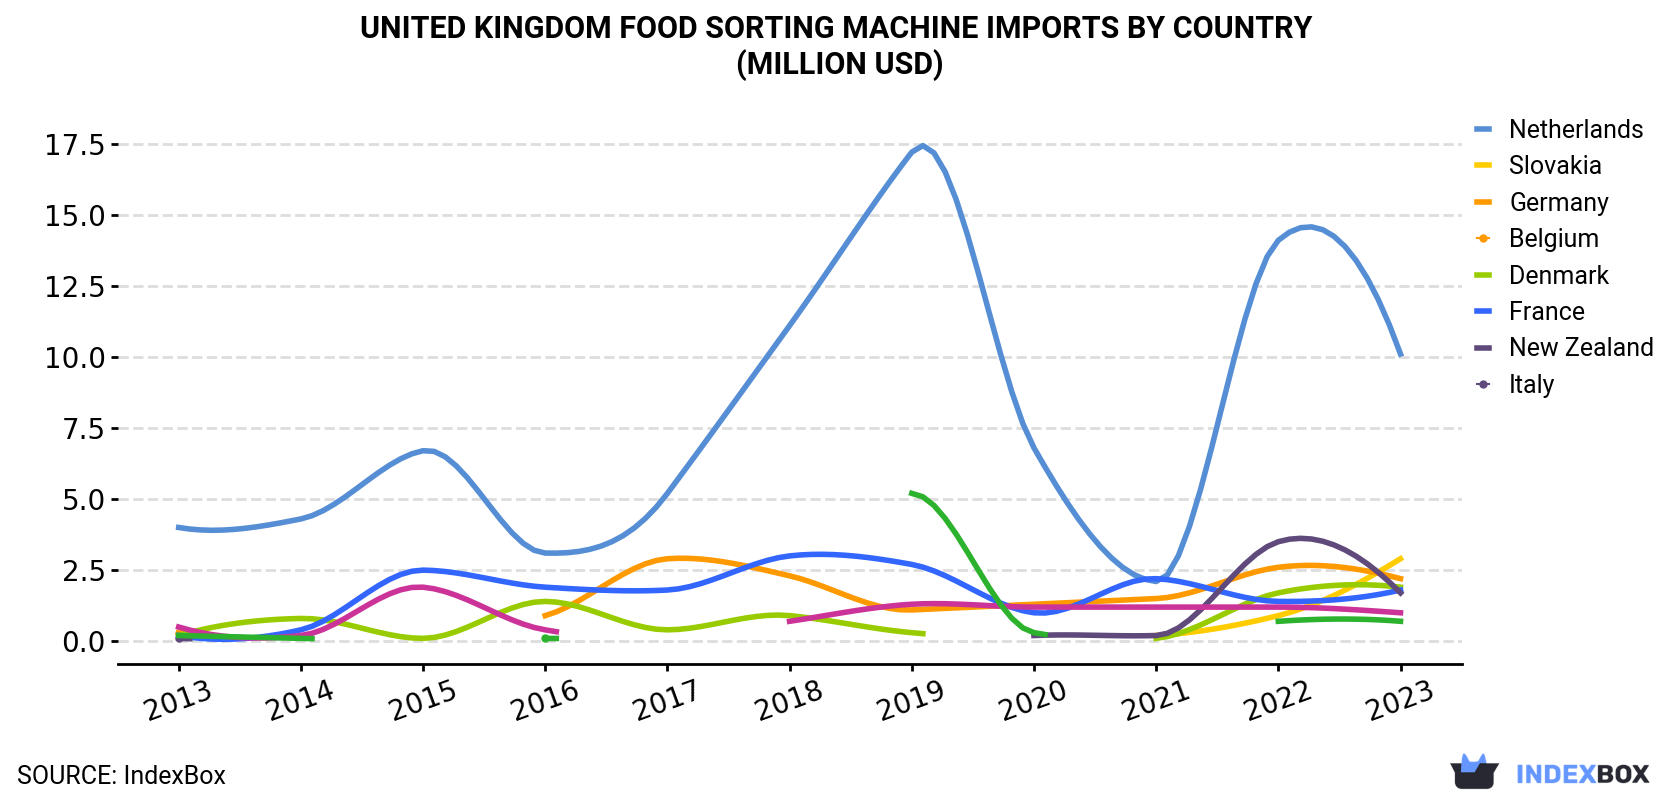 United Kingdom Food Sorting Machine Imports By Country (Million USD)